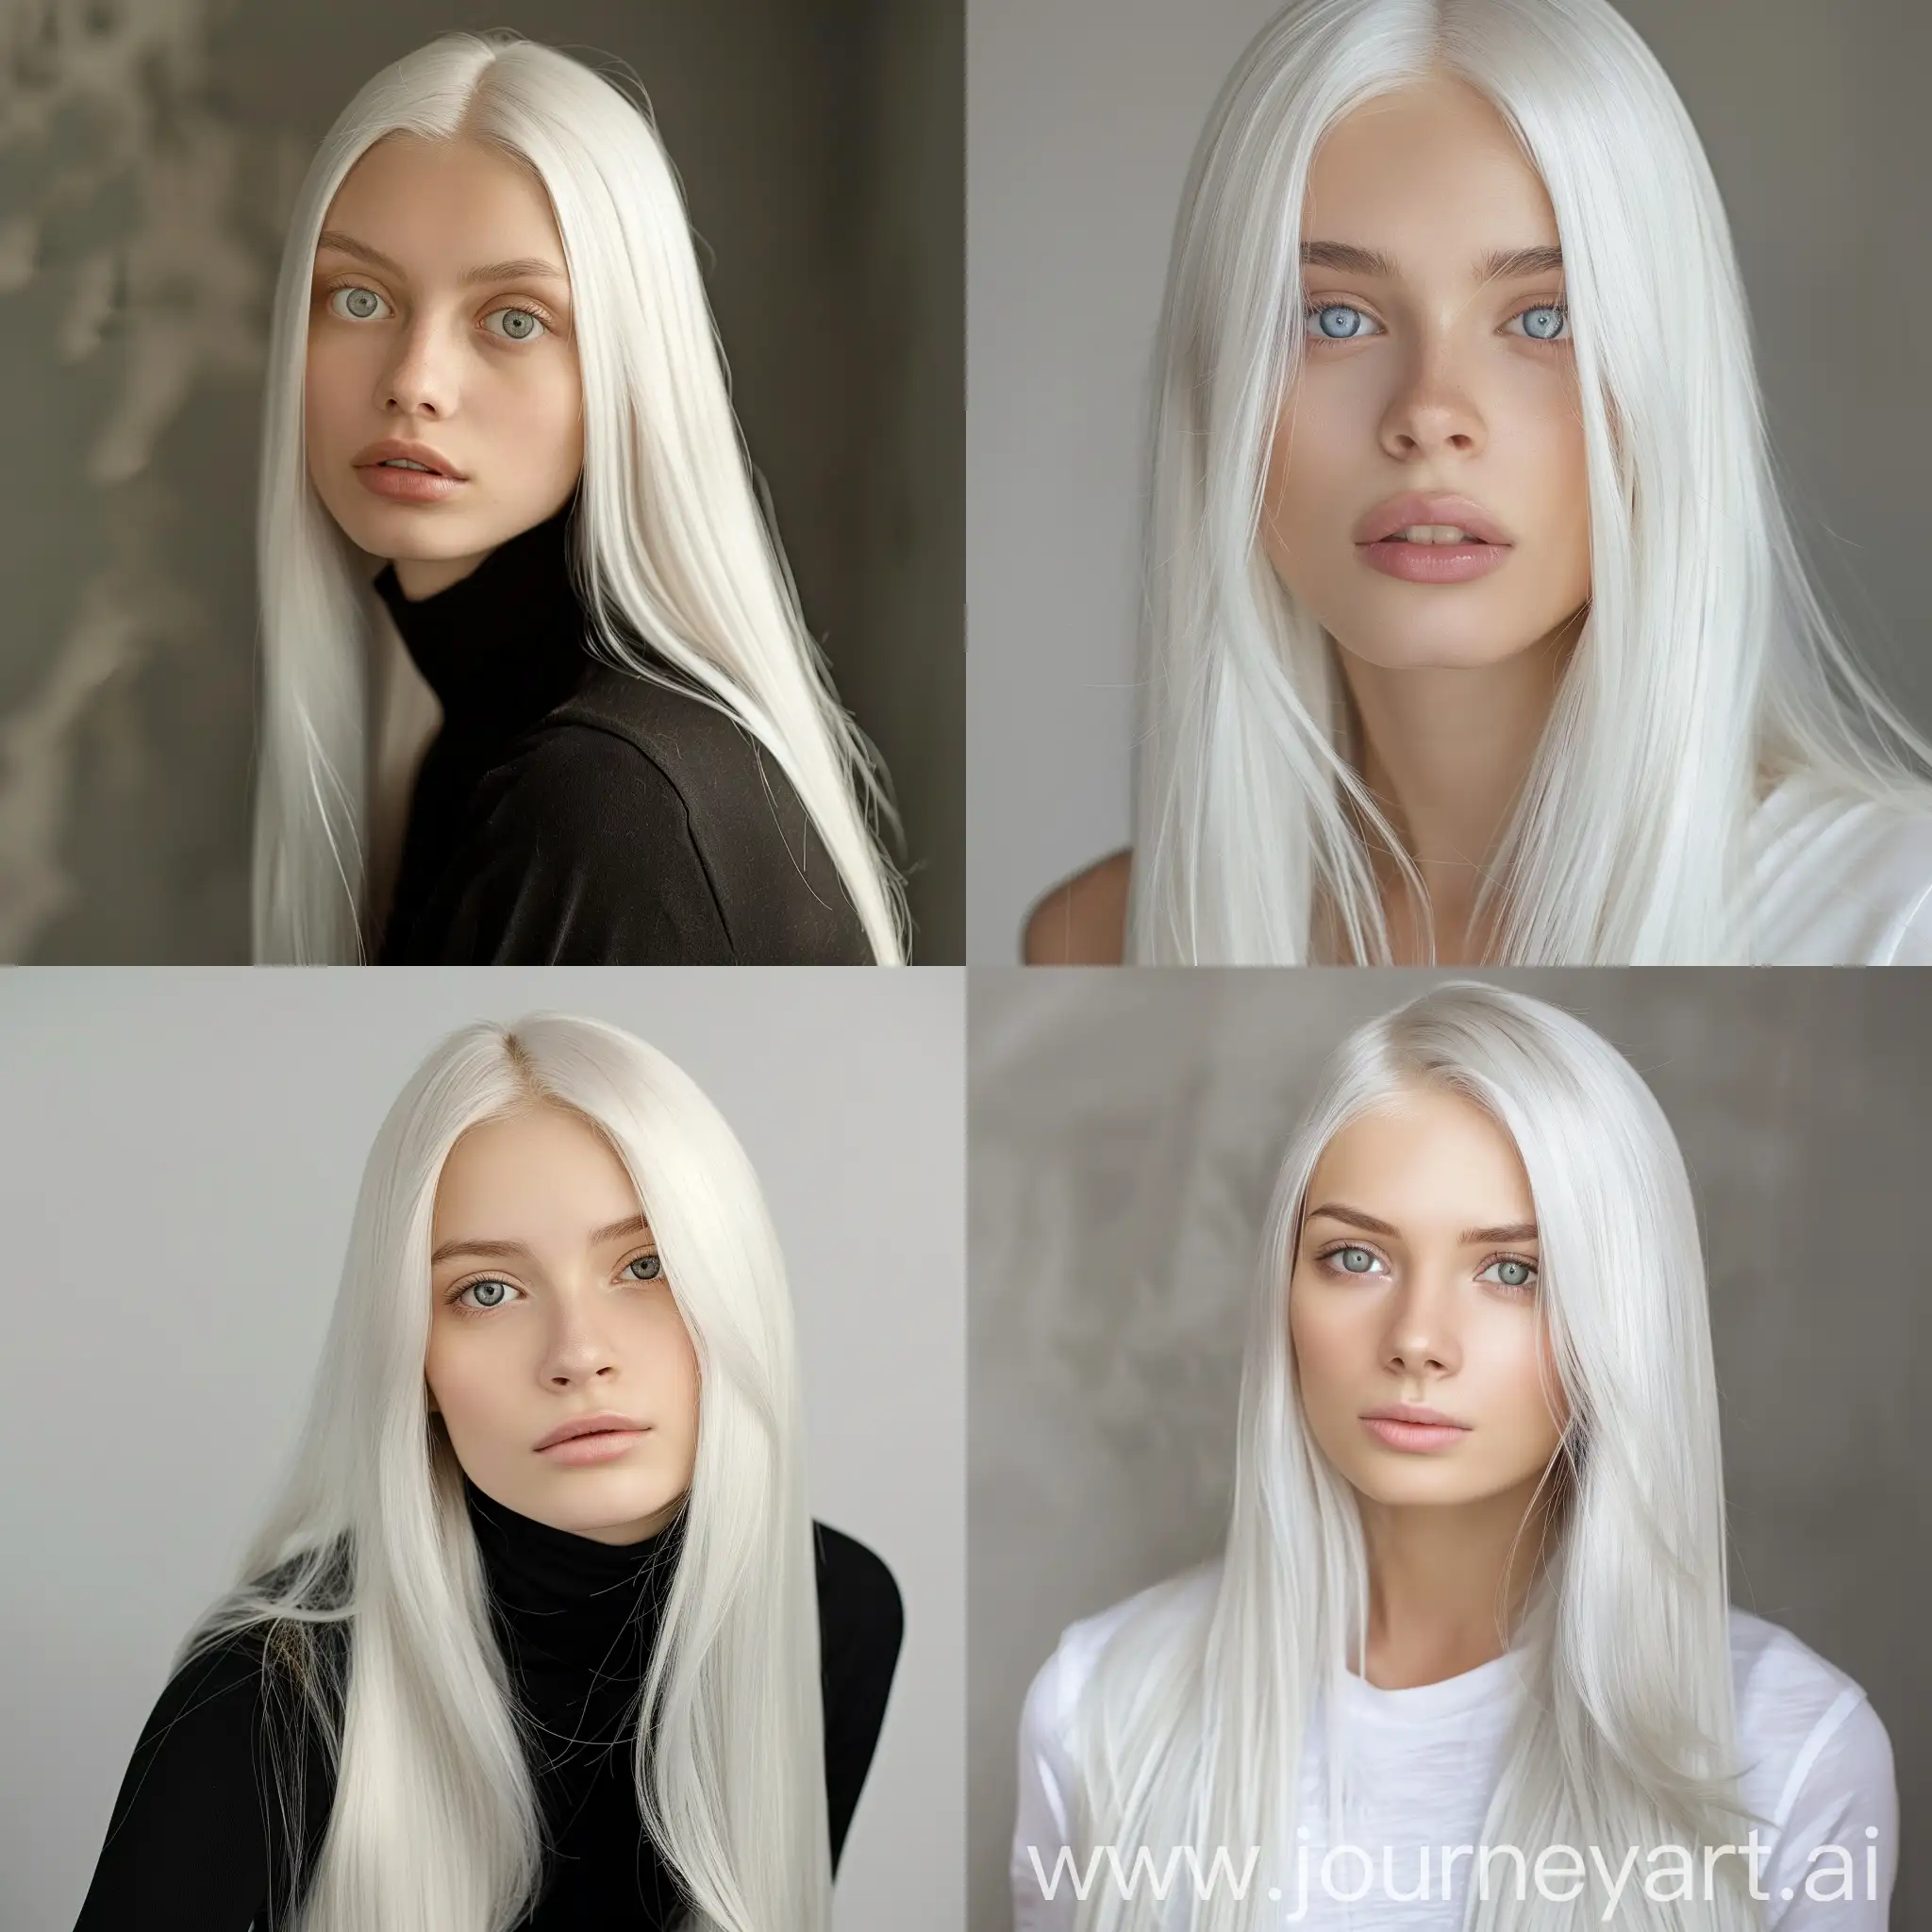 Ethereal-Beauty-Radiant-19YearOld-Model-with-Long-Shiny-White-Hair